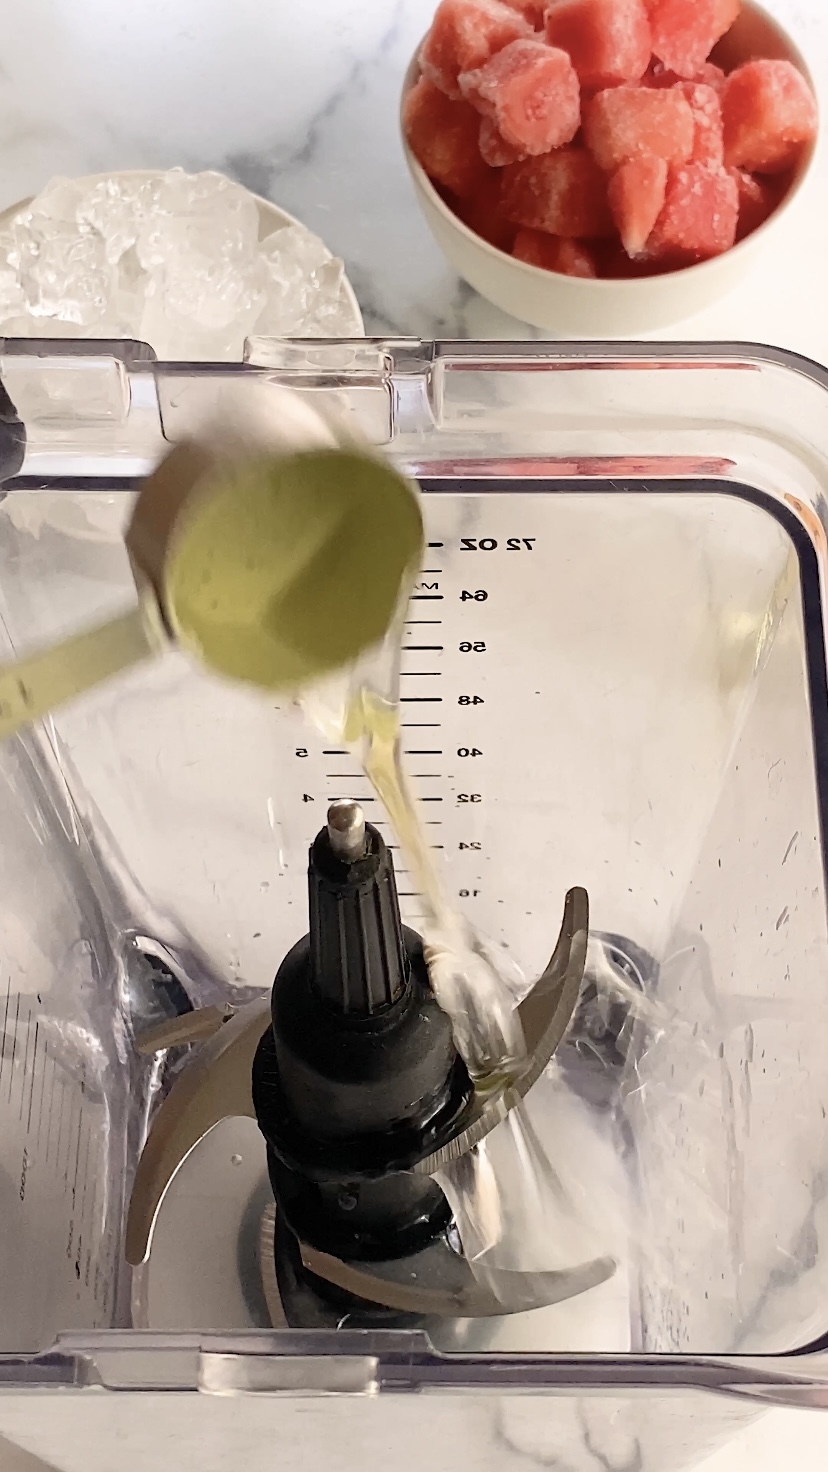 Simple syrup is poured into a blender.